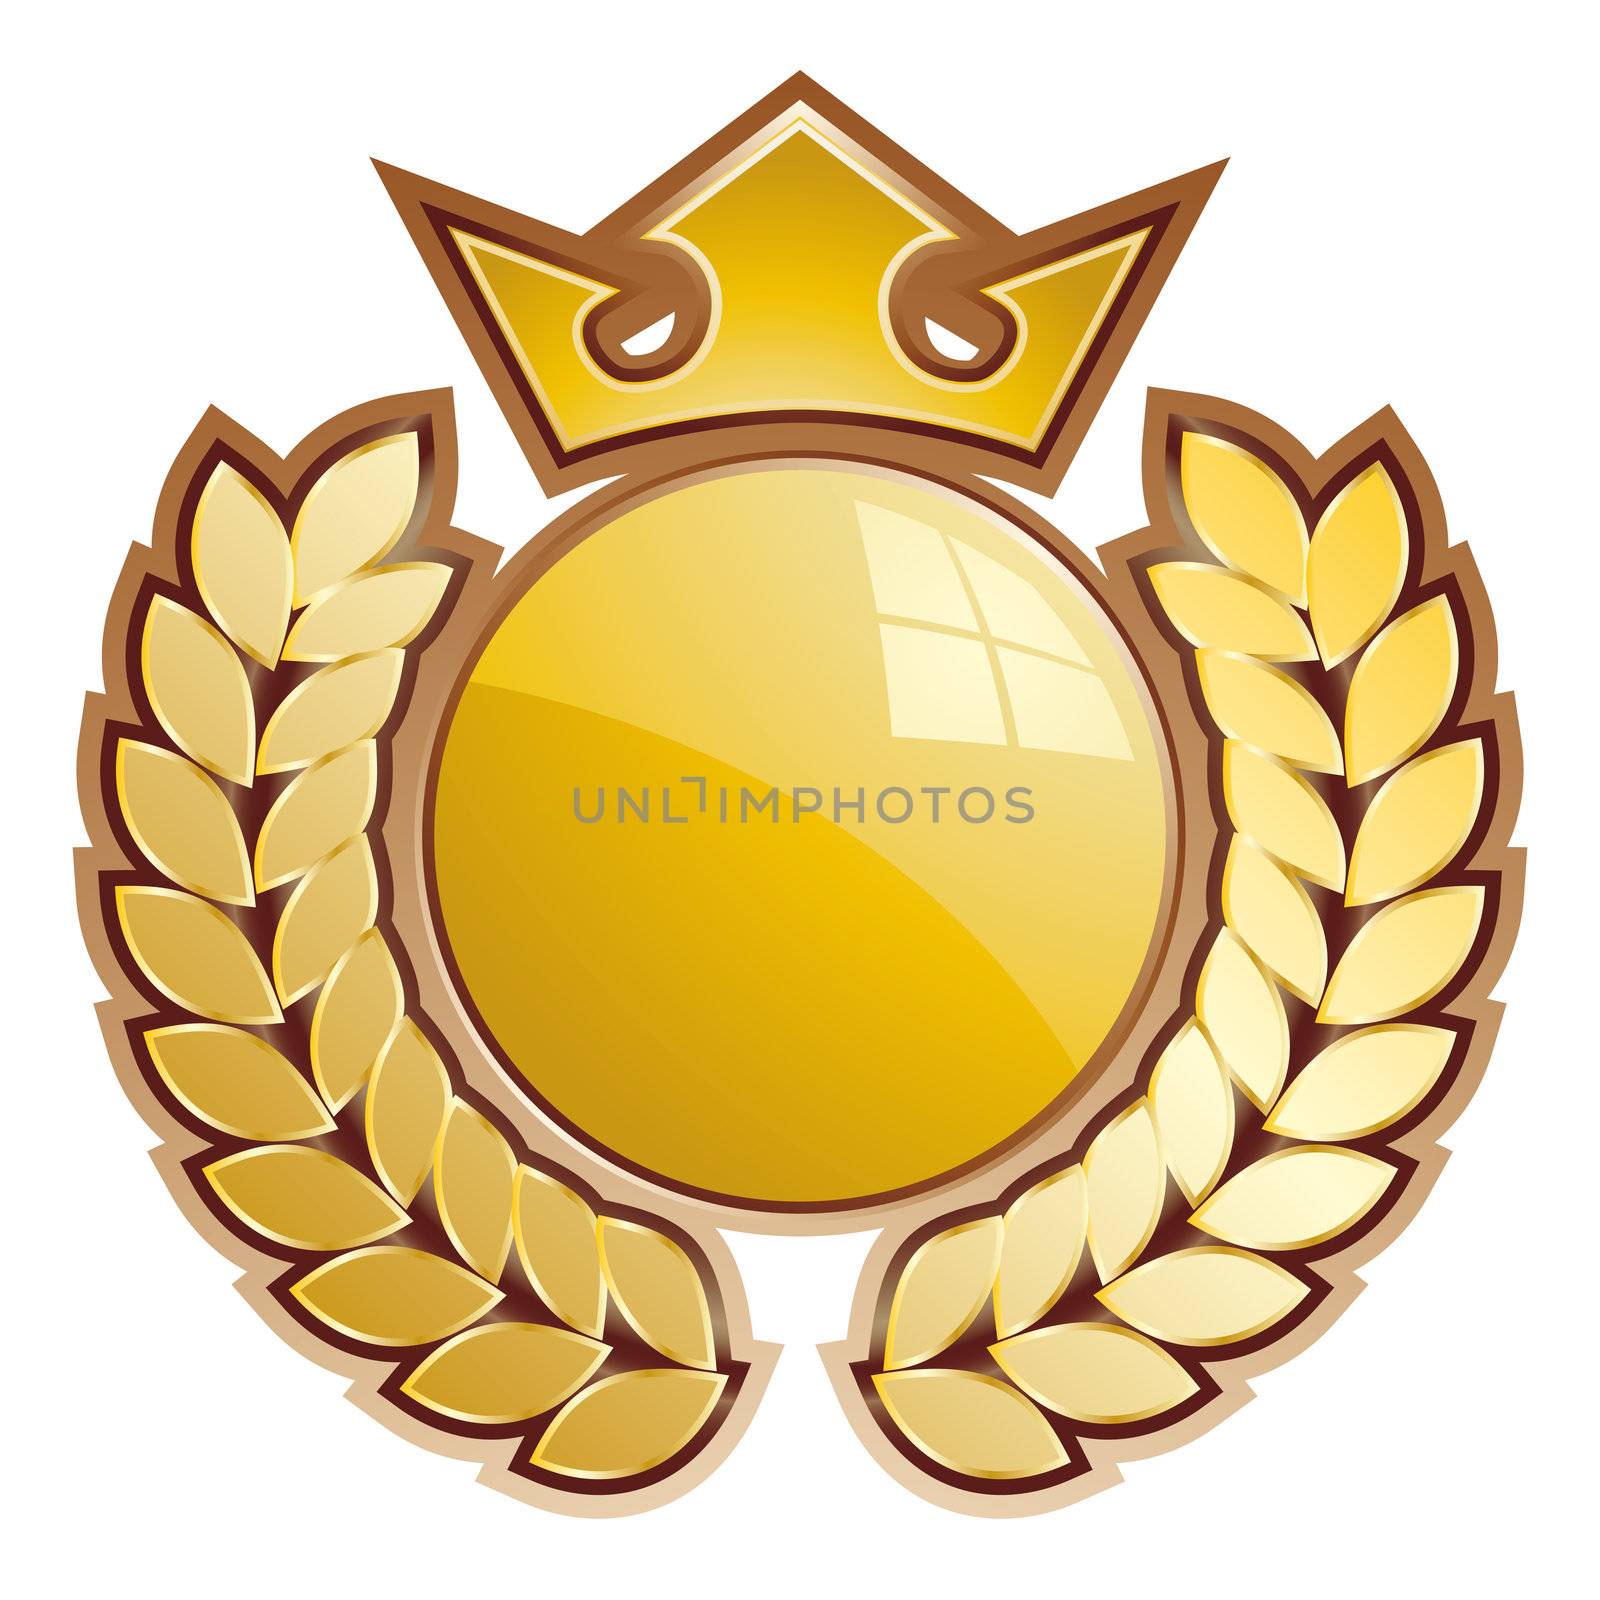 Gold sphere shield - whit crown and laurels.